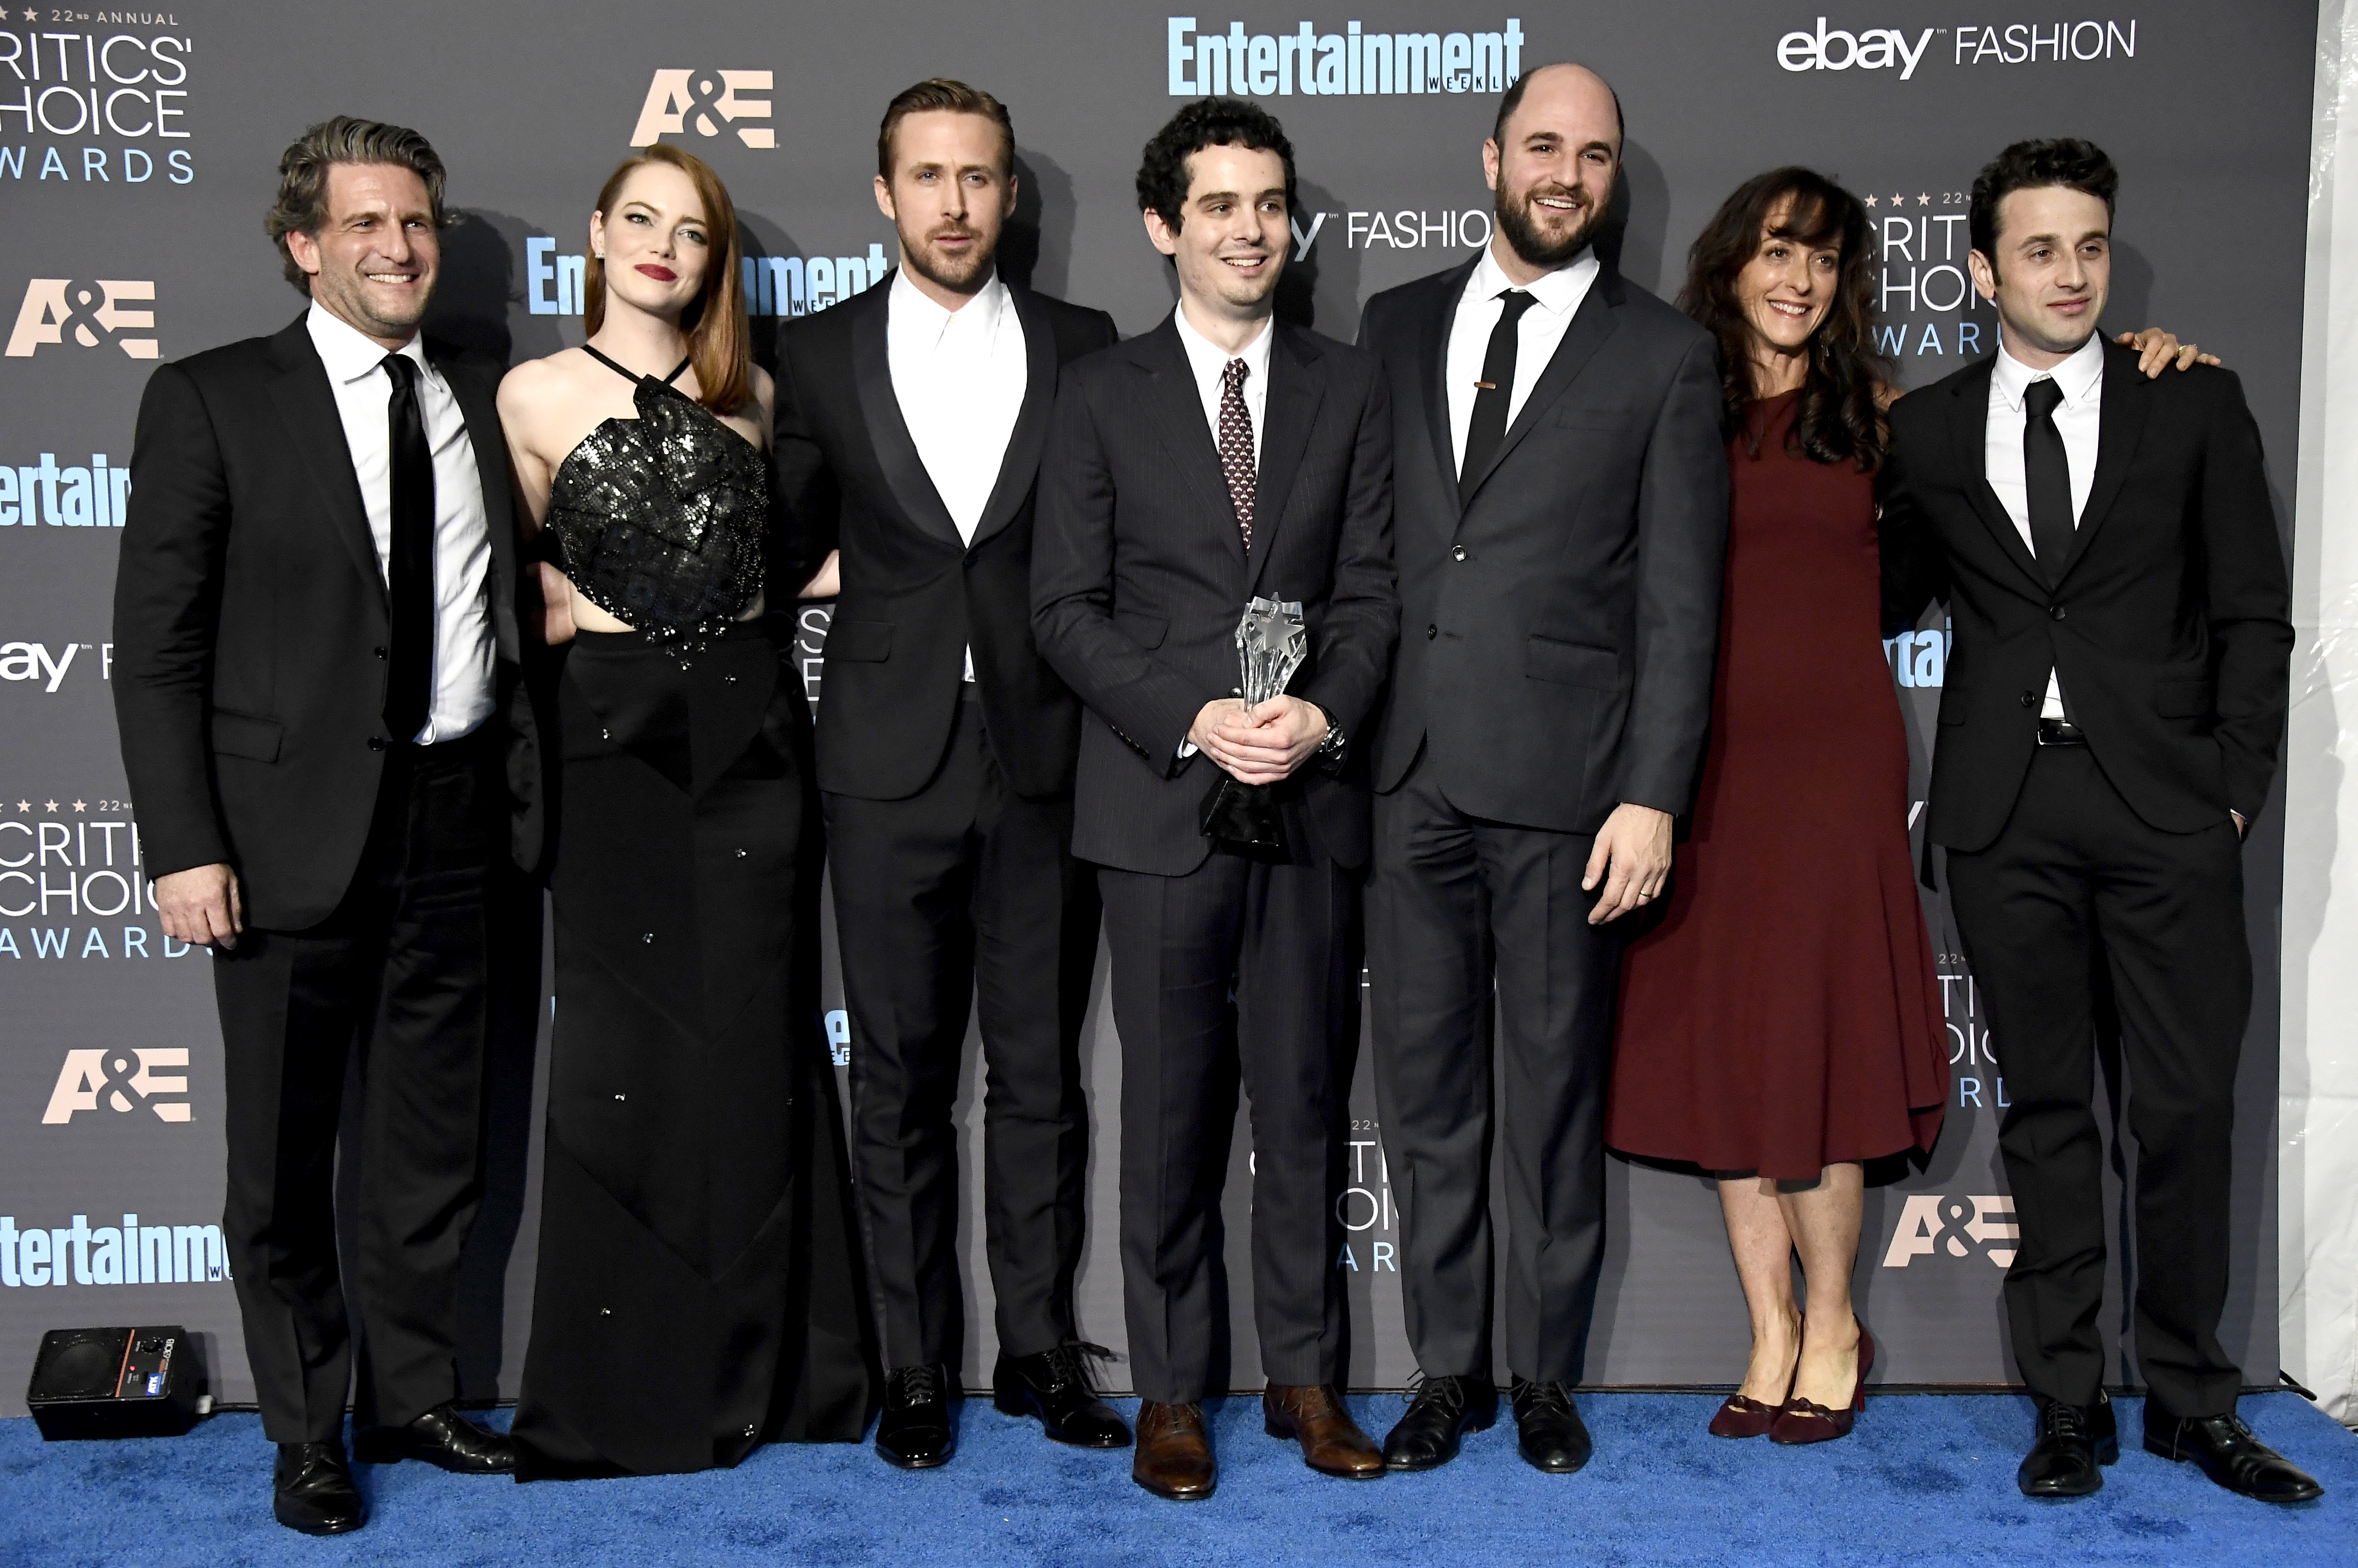 SANTA MONICA, CA - DECEMBER 11: (L-R) Producer Gary Gilbert, actors Emma Stone and Ryan Gosling, director Damien Chazelle, producer Jordan Horowitz, costume designer Mary Zophres and composer Justin Hurwitz, winners of Best Picture for 'La La Land', pose in the press room during The 22nd Annual Critics' Choice Awards at Barker Hangar on December 11, 2016 in Santa Monica, California.   Frazer Harrison/Getty Images/AFP